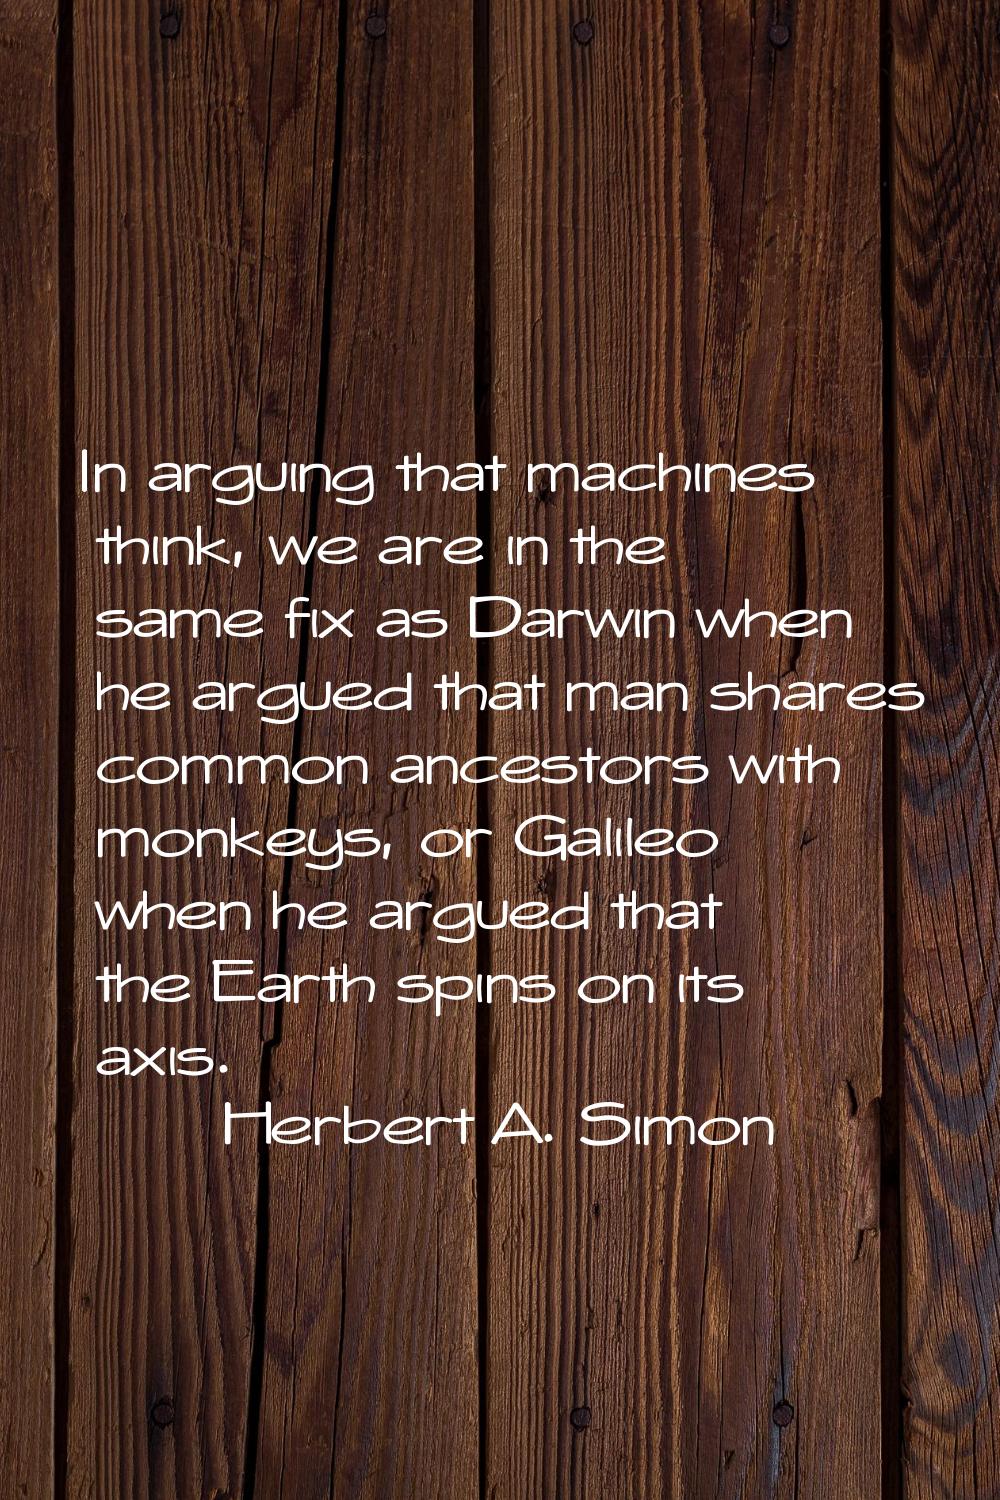 In arguing that machines think, we are in the same fix as Darwin when he argued that man shares com